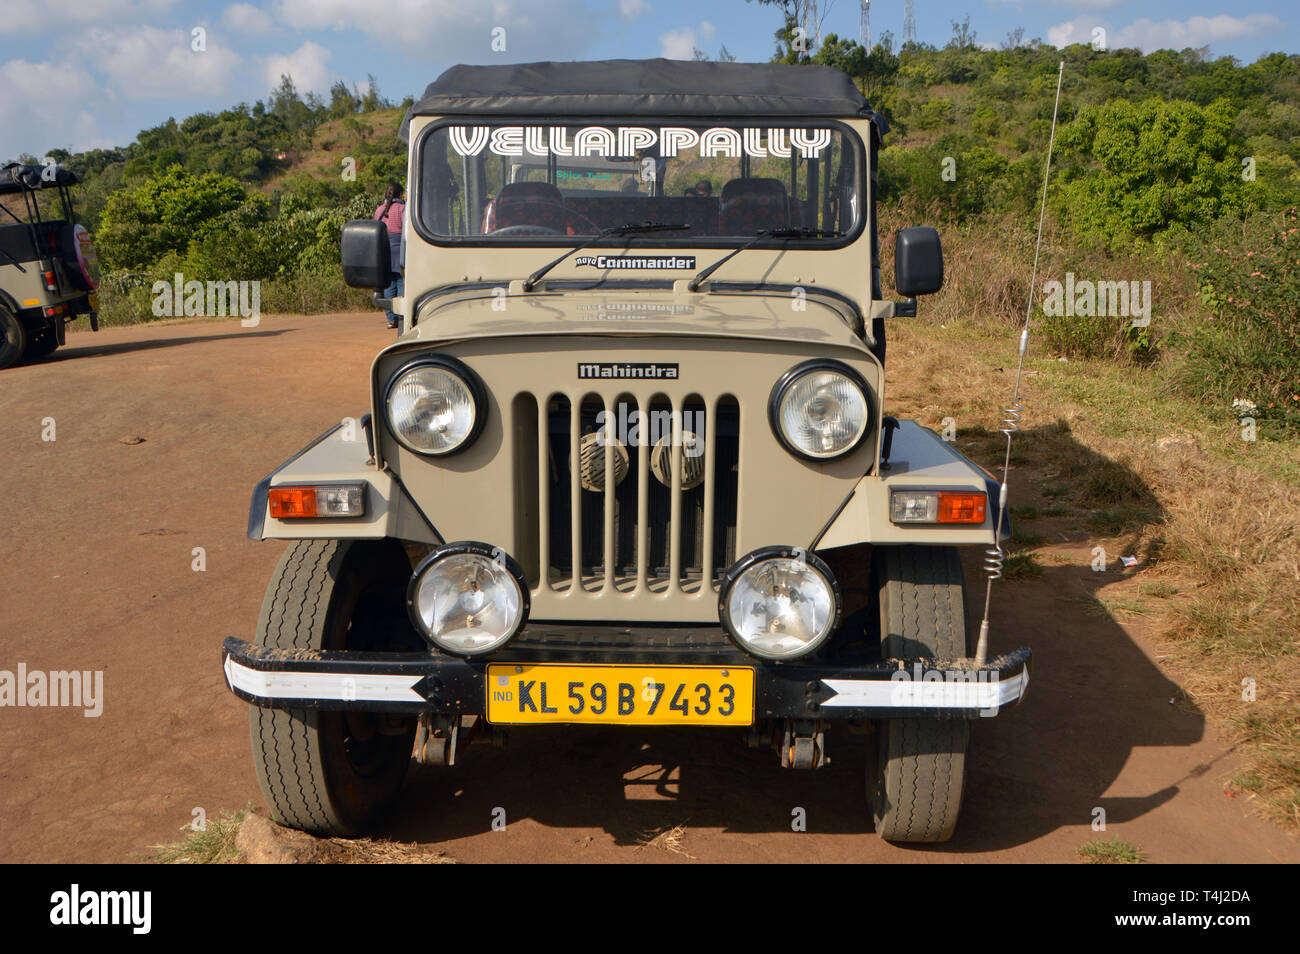 Jeep of the brand 'Mahindra' in the Periyar National Park in the south of India, recorded on 11.02.2019 | usage worldwide Stock Photo